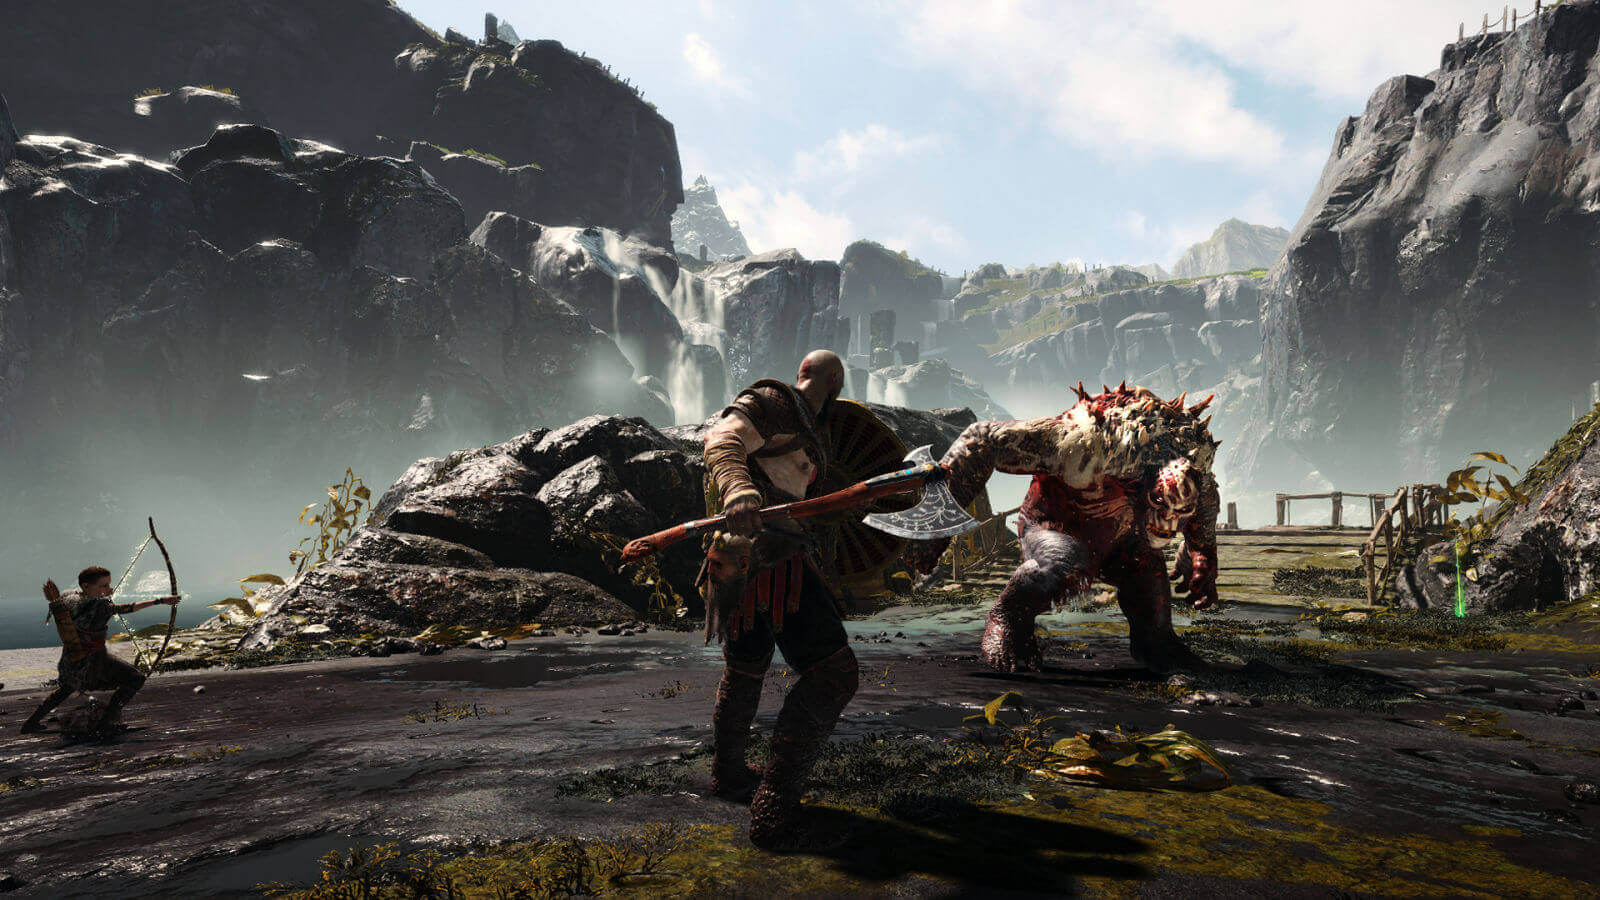 God of War has sold over 10 million copies